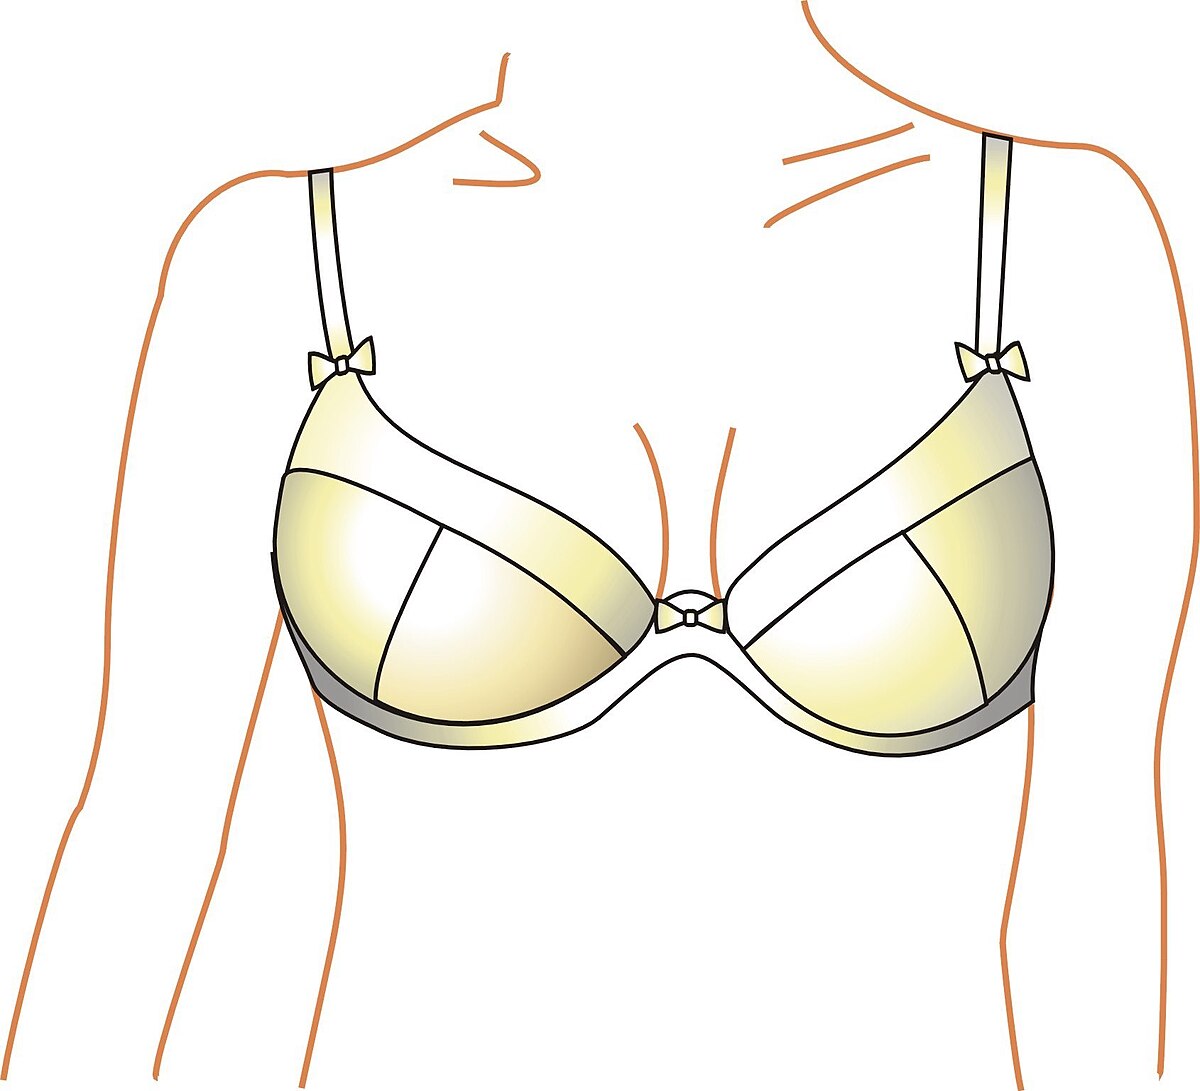 How to pronounce brassiere in French